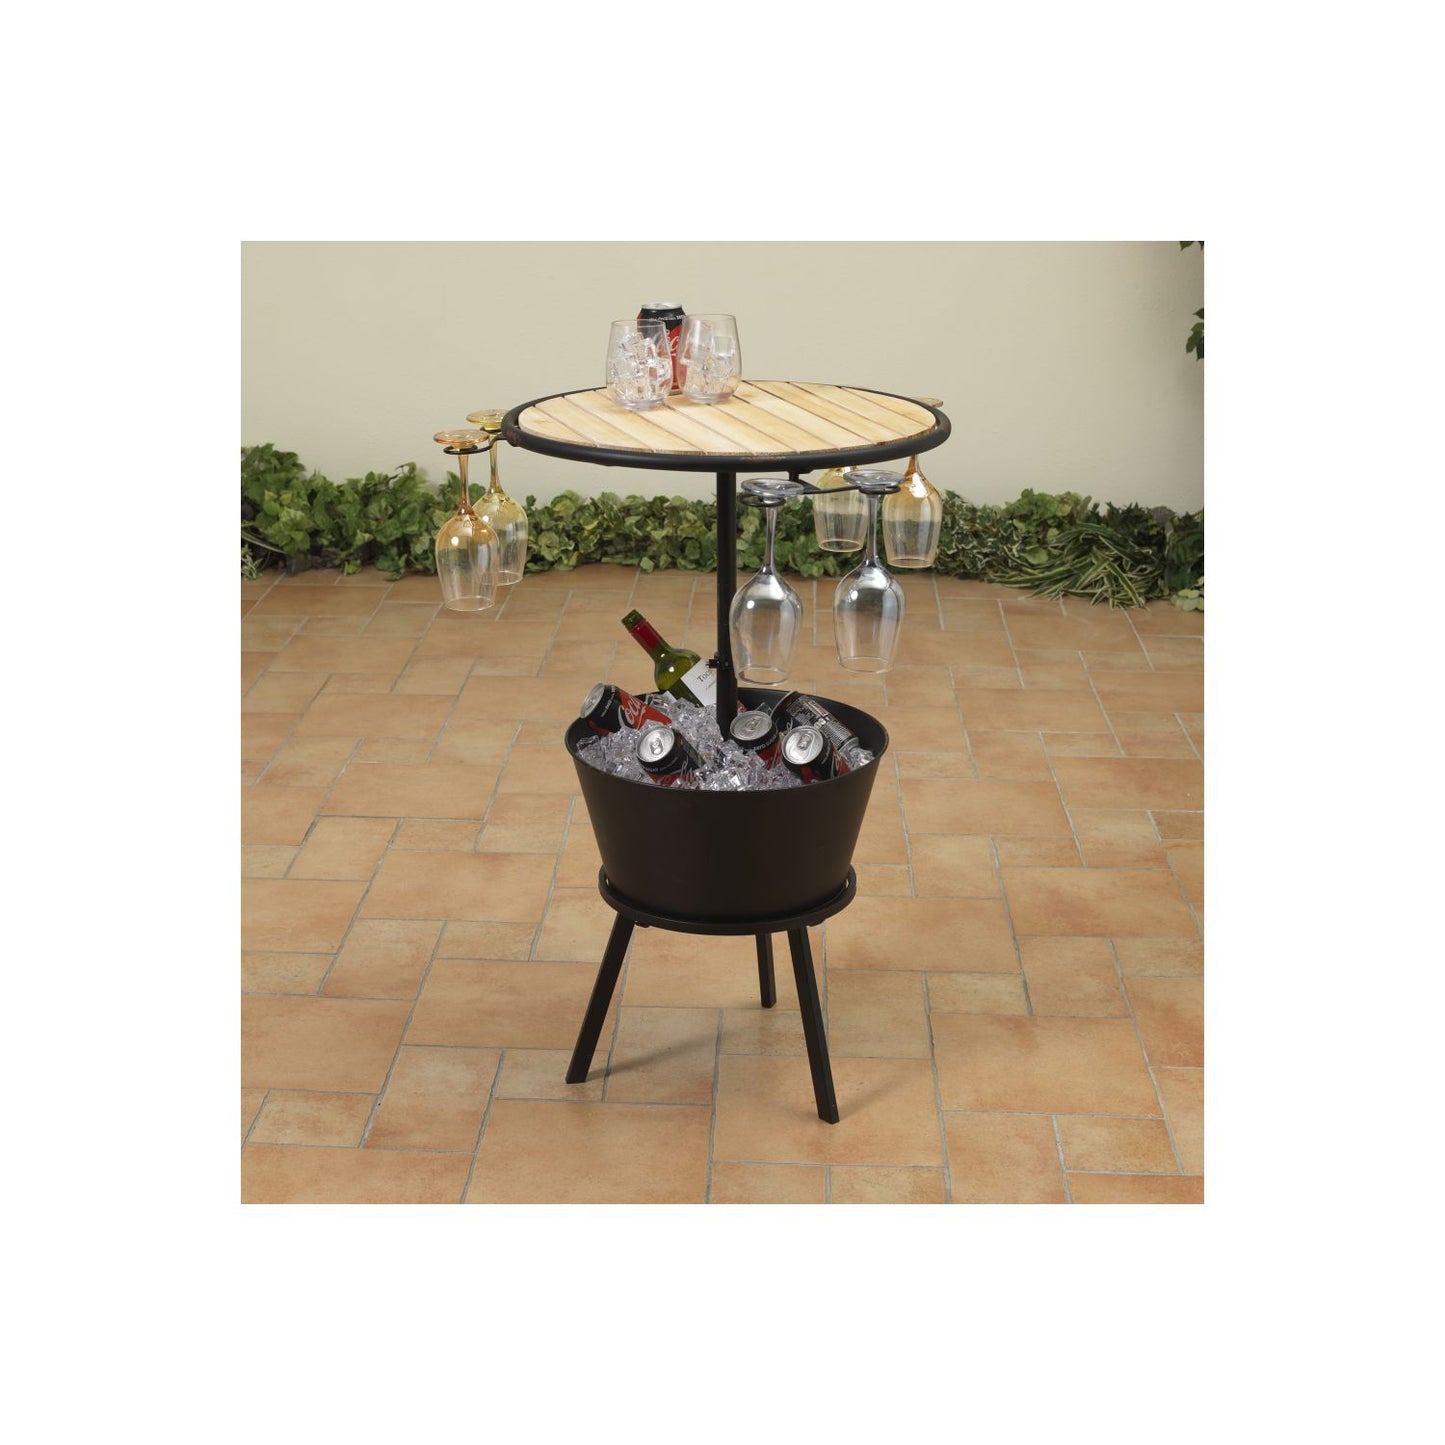 Gerson Company 35.75"H Metal & Wood Outdoor Table W/ Ice Bucket